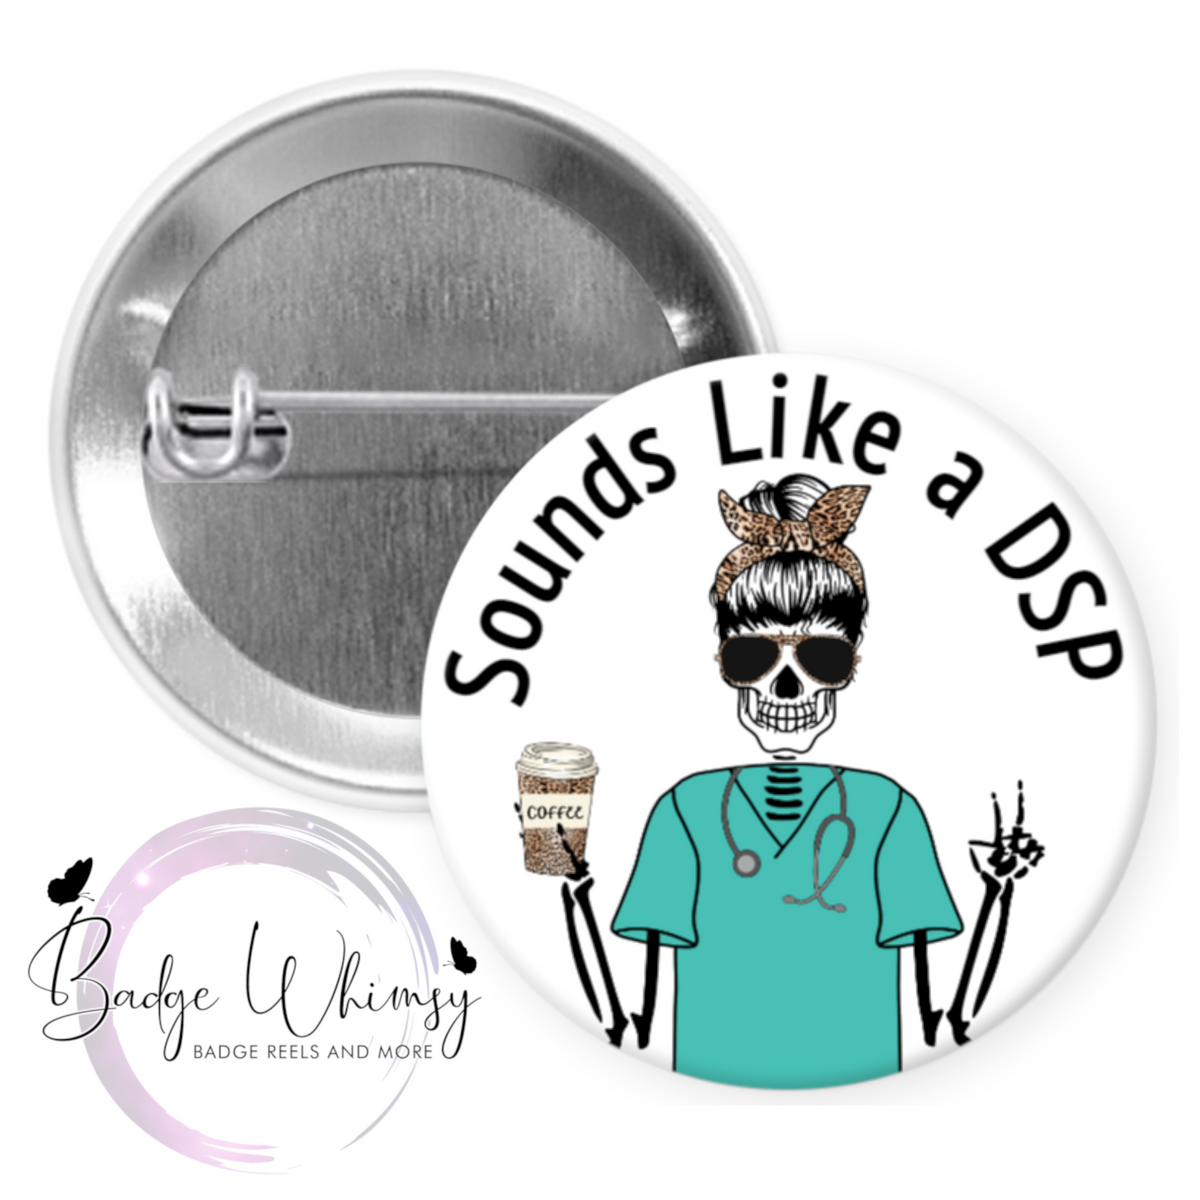 Nurse - Sounds Like a DSP - Day Shift Problem - Pin, Magnet or Badge H